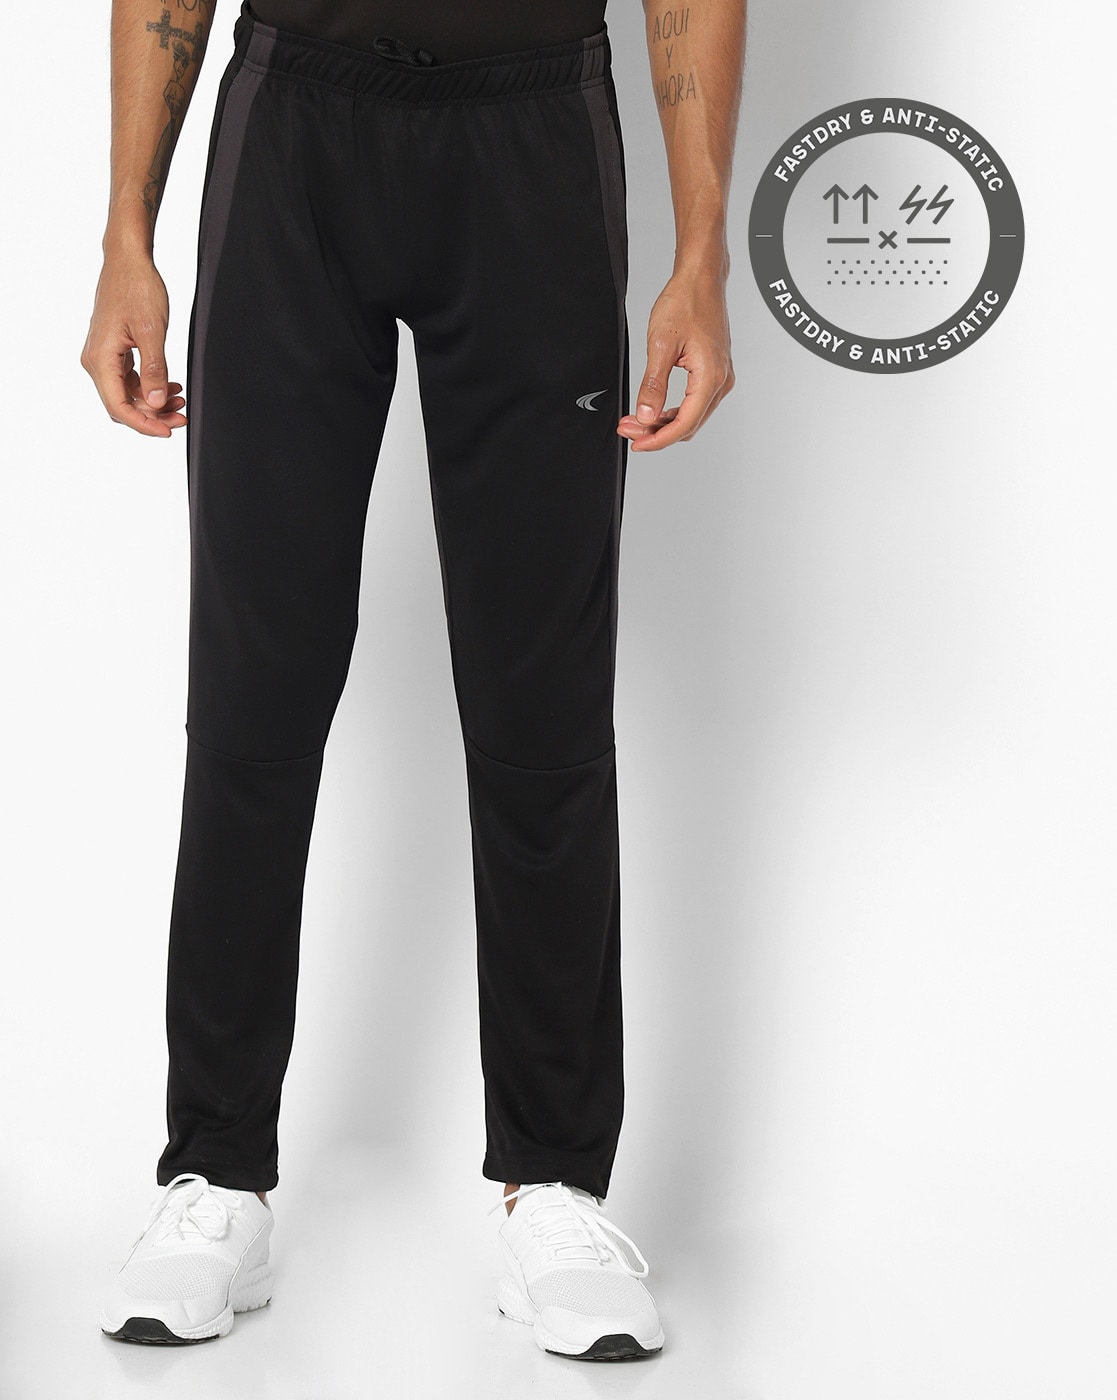 younger choice Printed Men Black Track Pants - Buy younger choice Printed  Men Black Track Pants Online at Best Prices in India | Flipkart.com